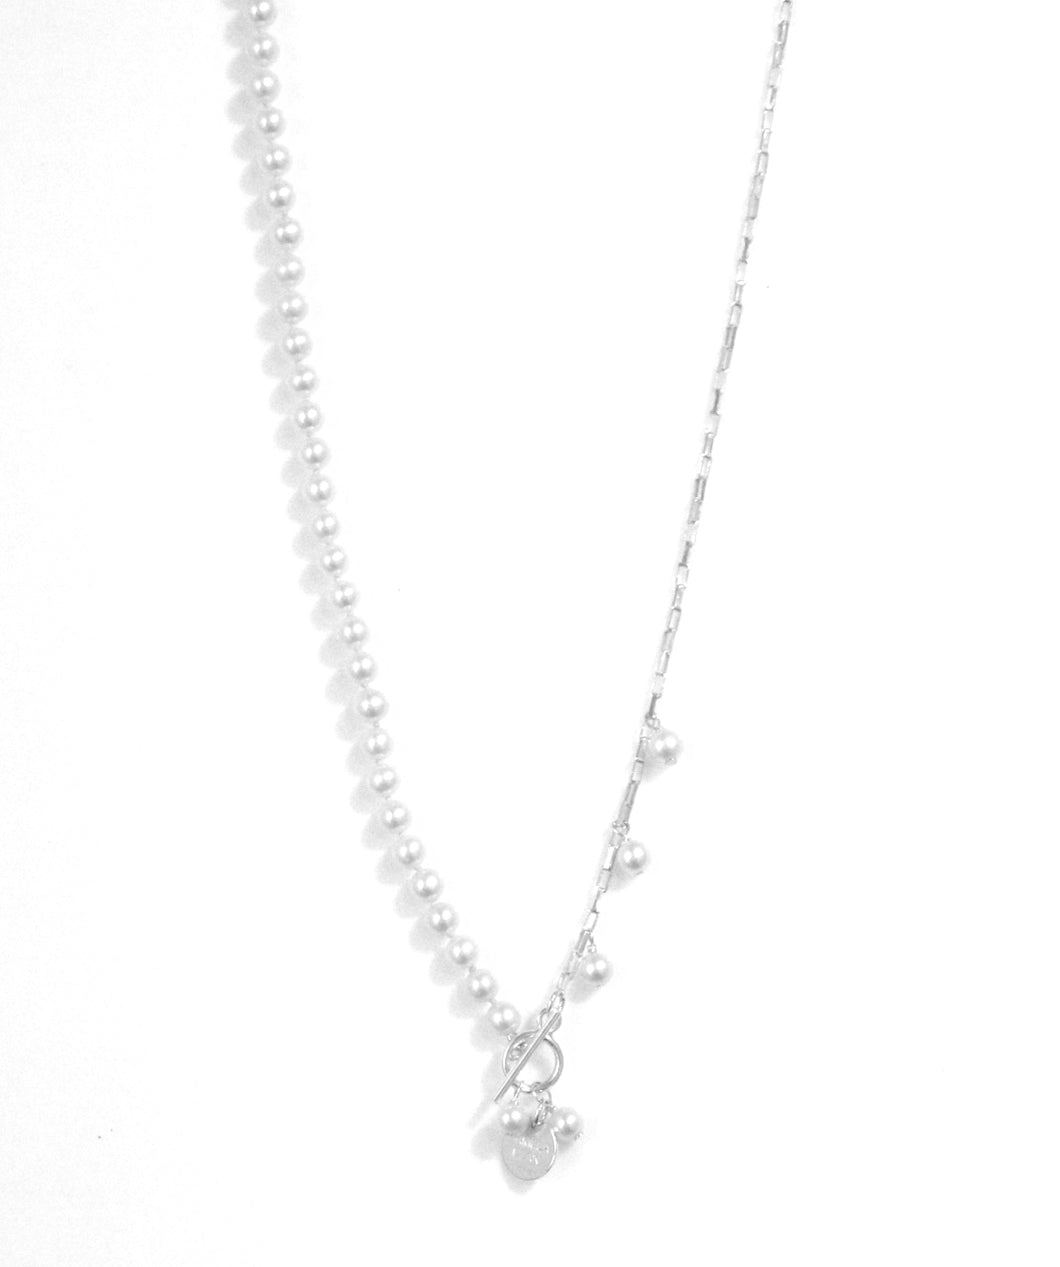 Australian Handmade White Pearl Necklace with Sterling Silver Chain and FOB